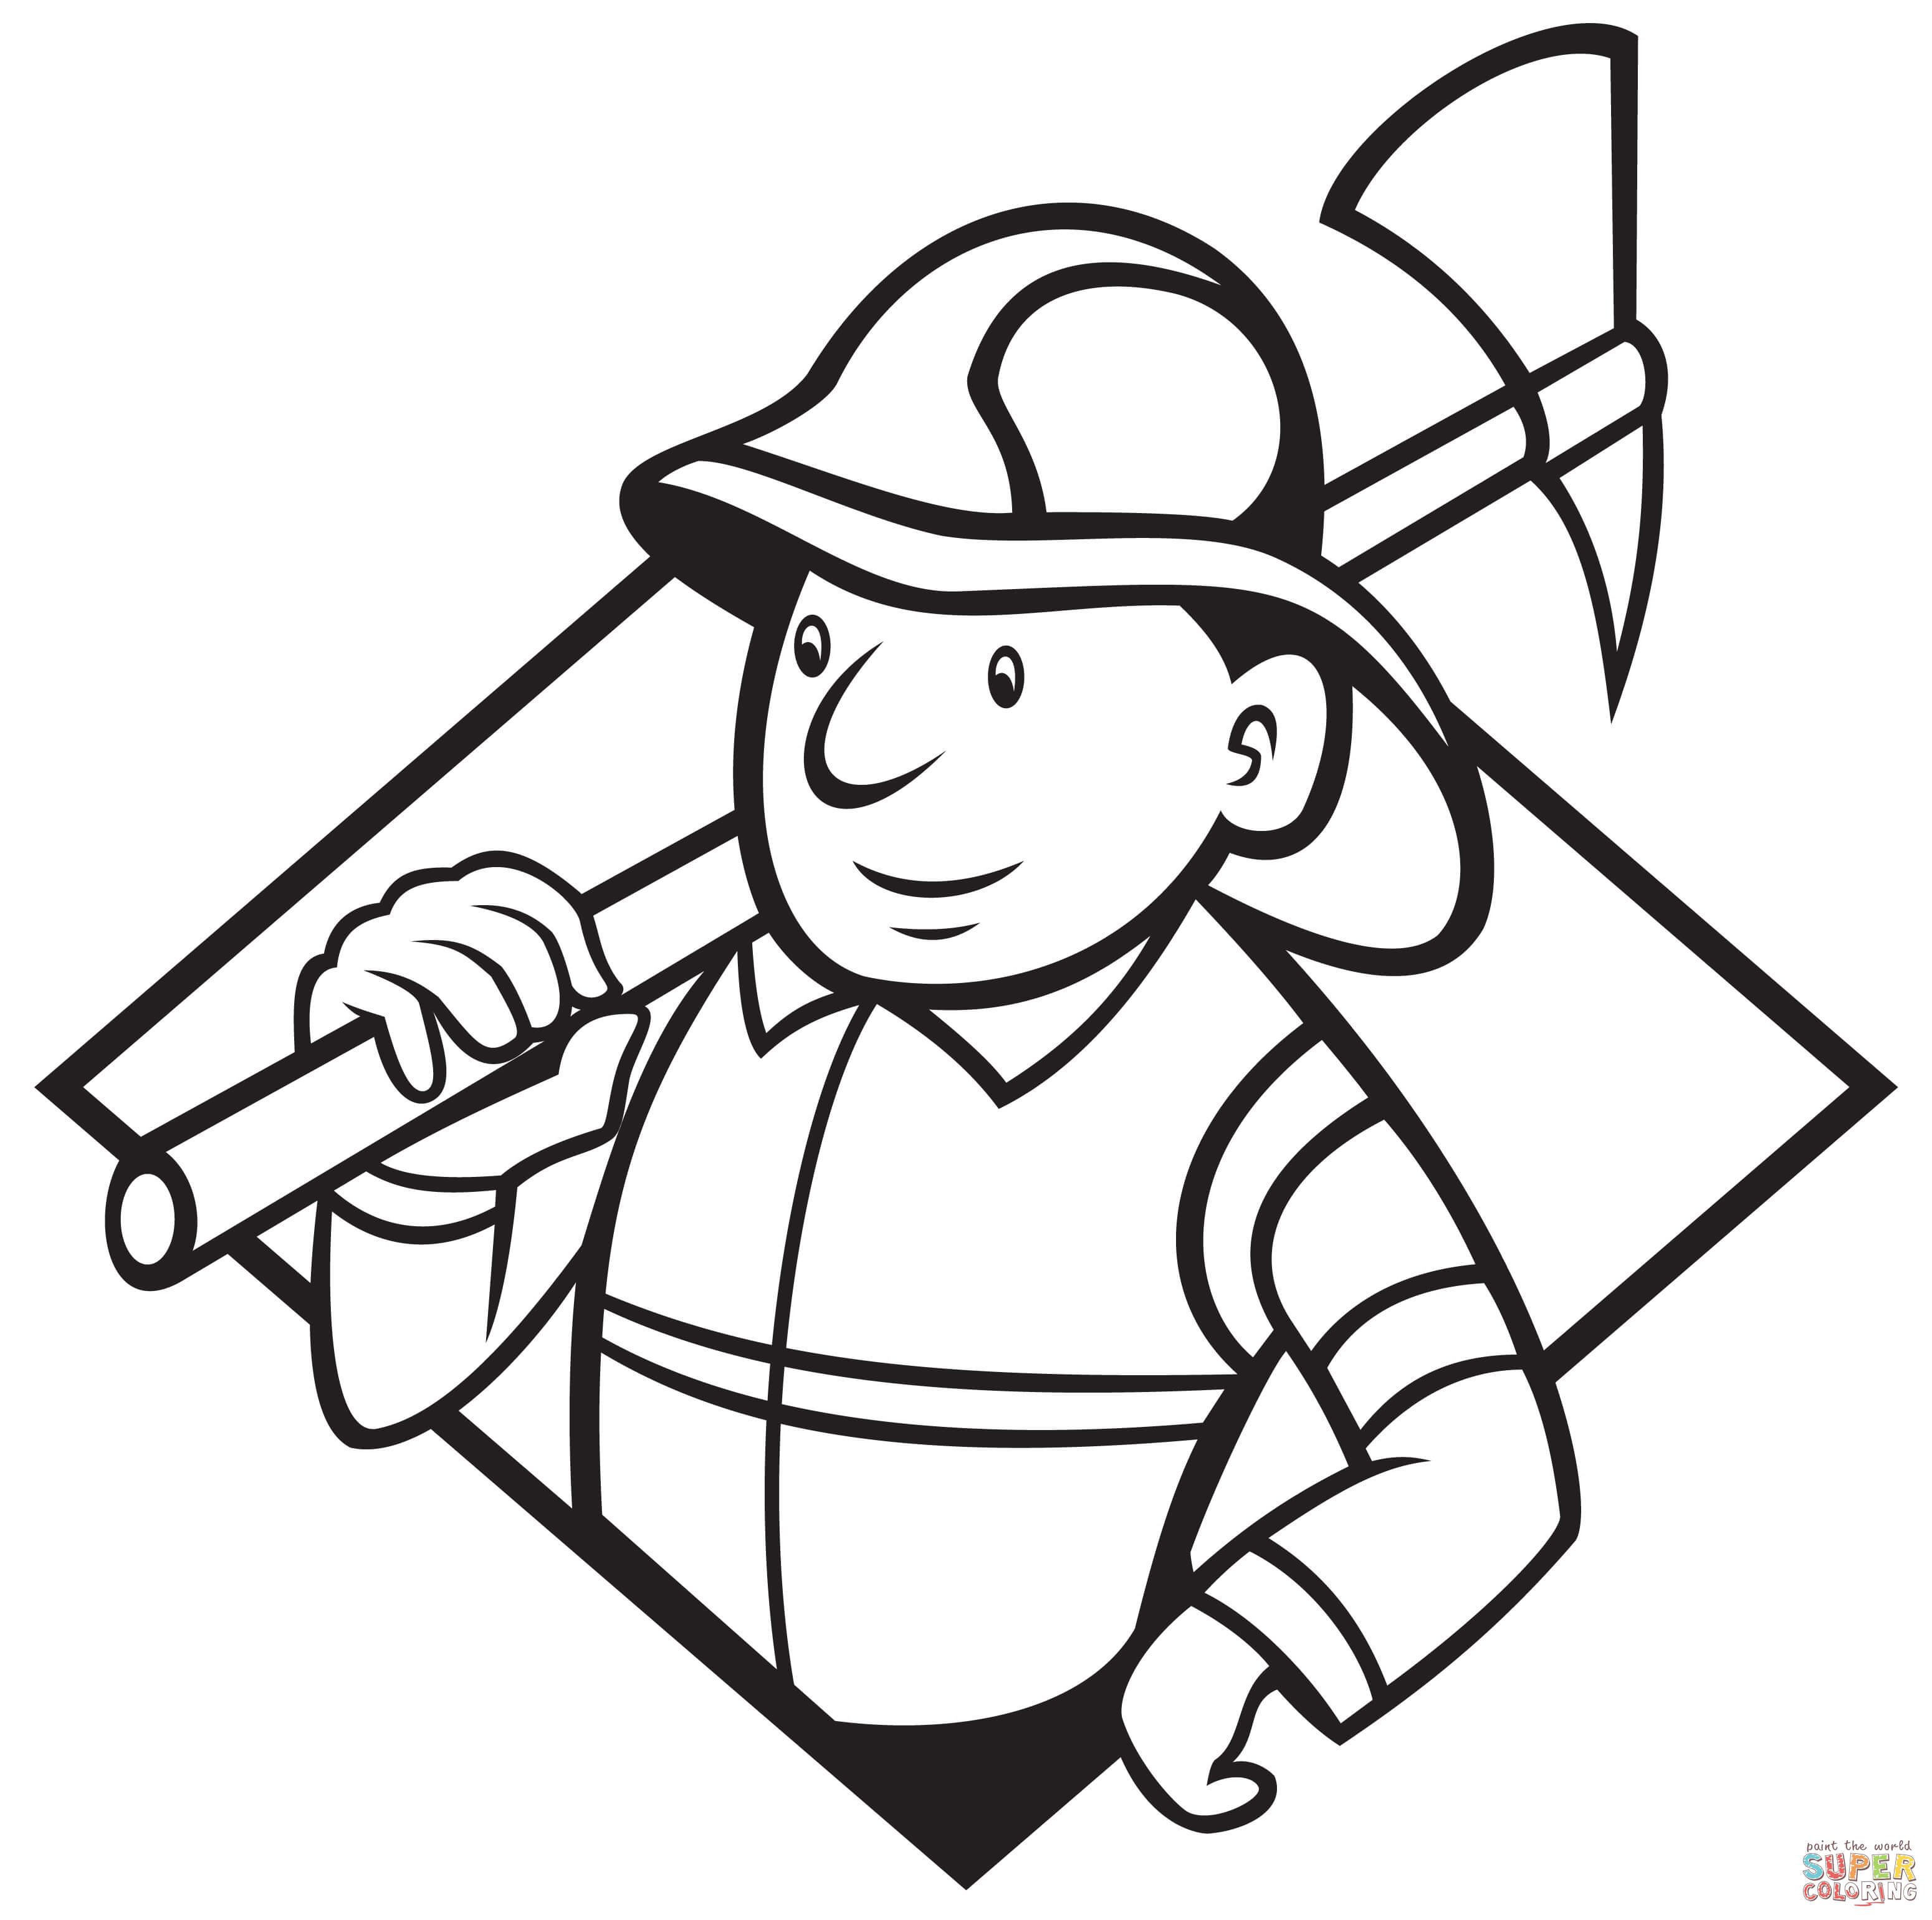 Fireman with Axe coloring page | Free Printable Coloring Pages